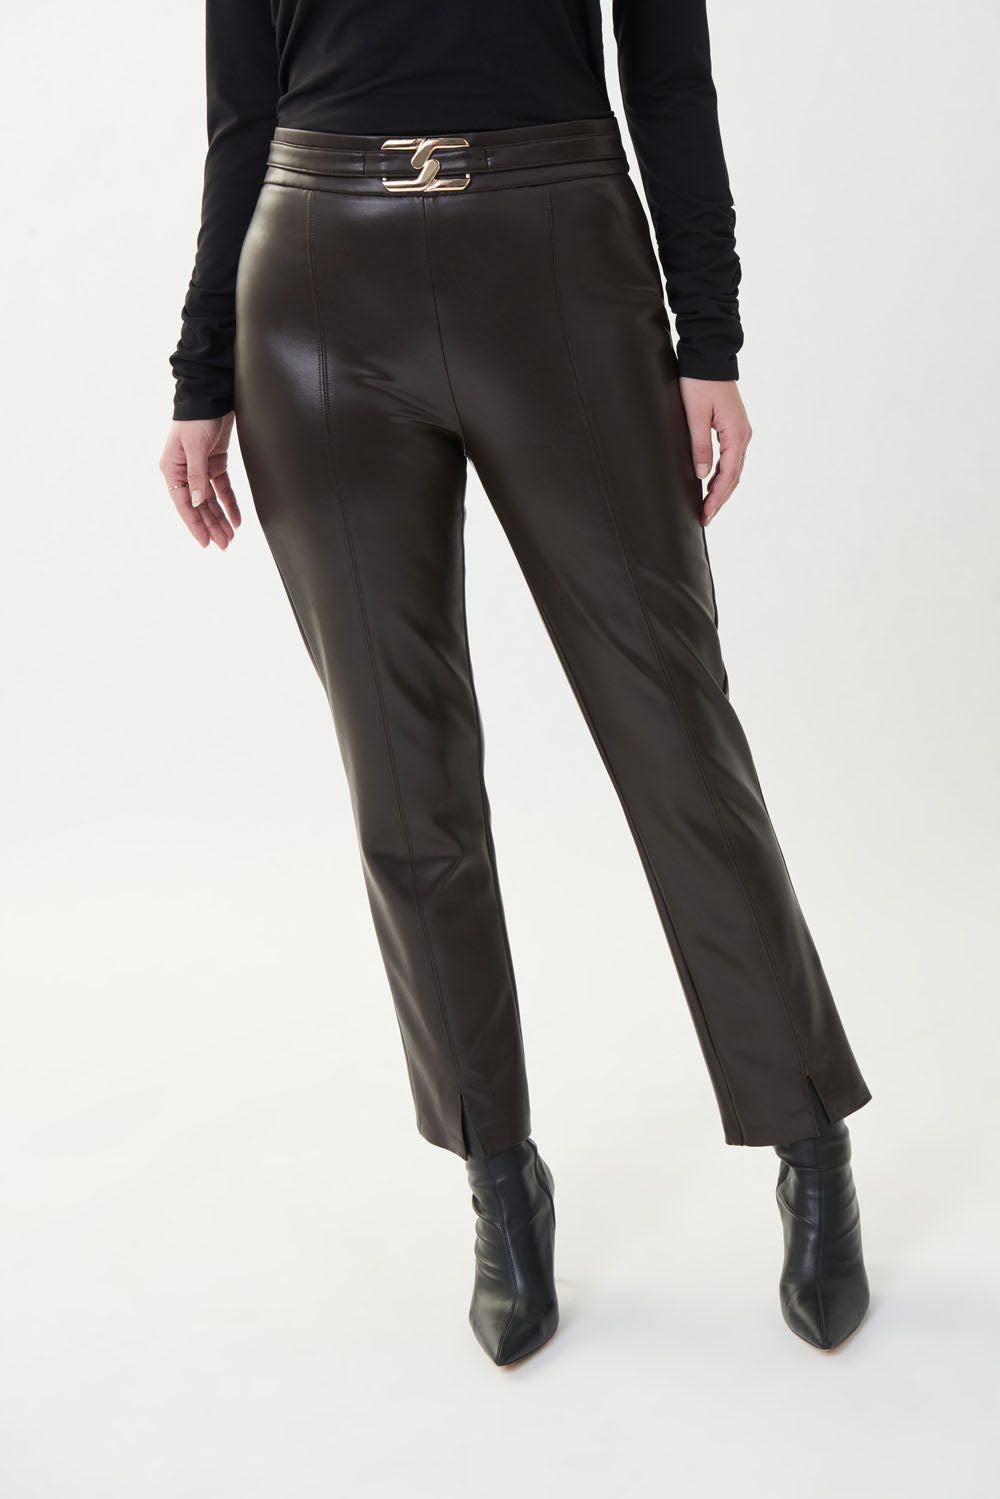 Buy Marks & Spencer Women Faux Leather Straight Fit High Rise Trousers -  Trousers for Women 19241122 | Myntra